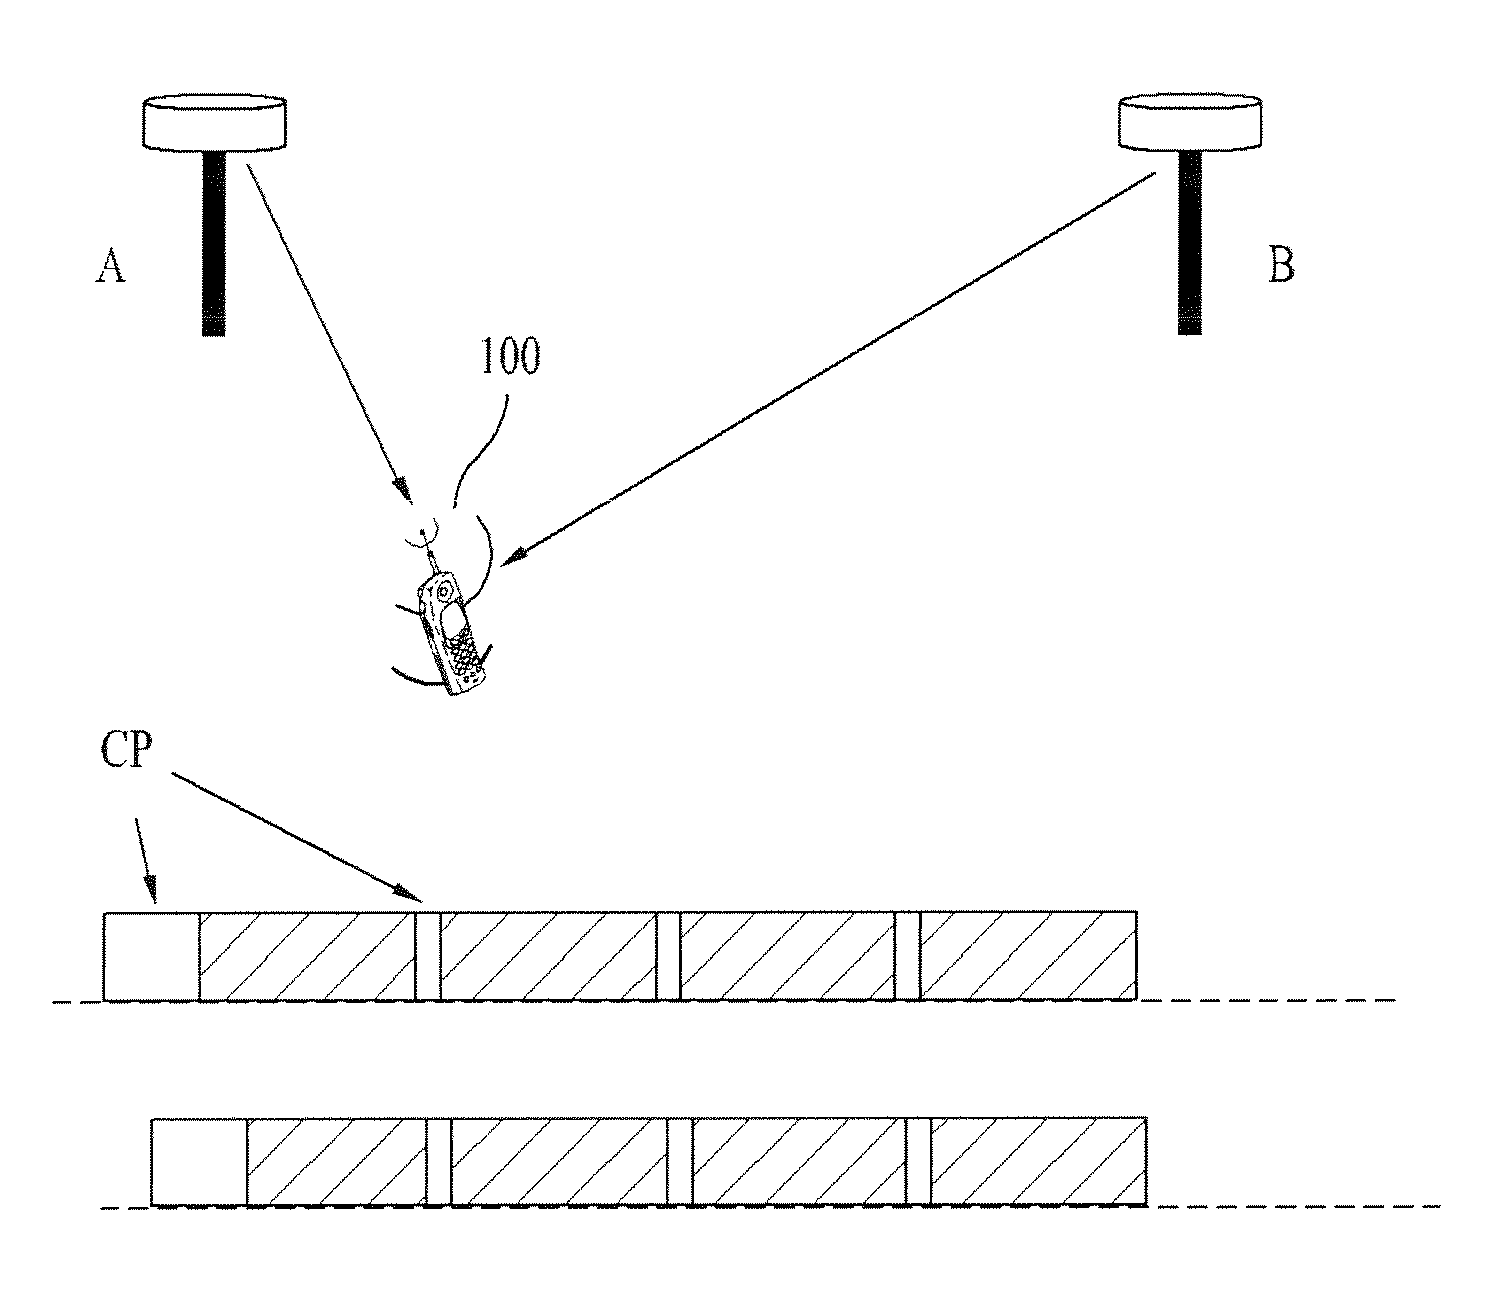 Delay control in a mobile communication system